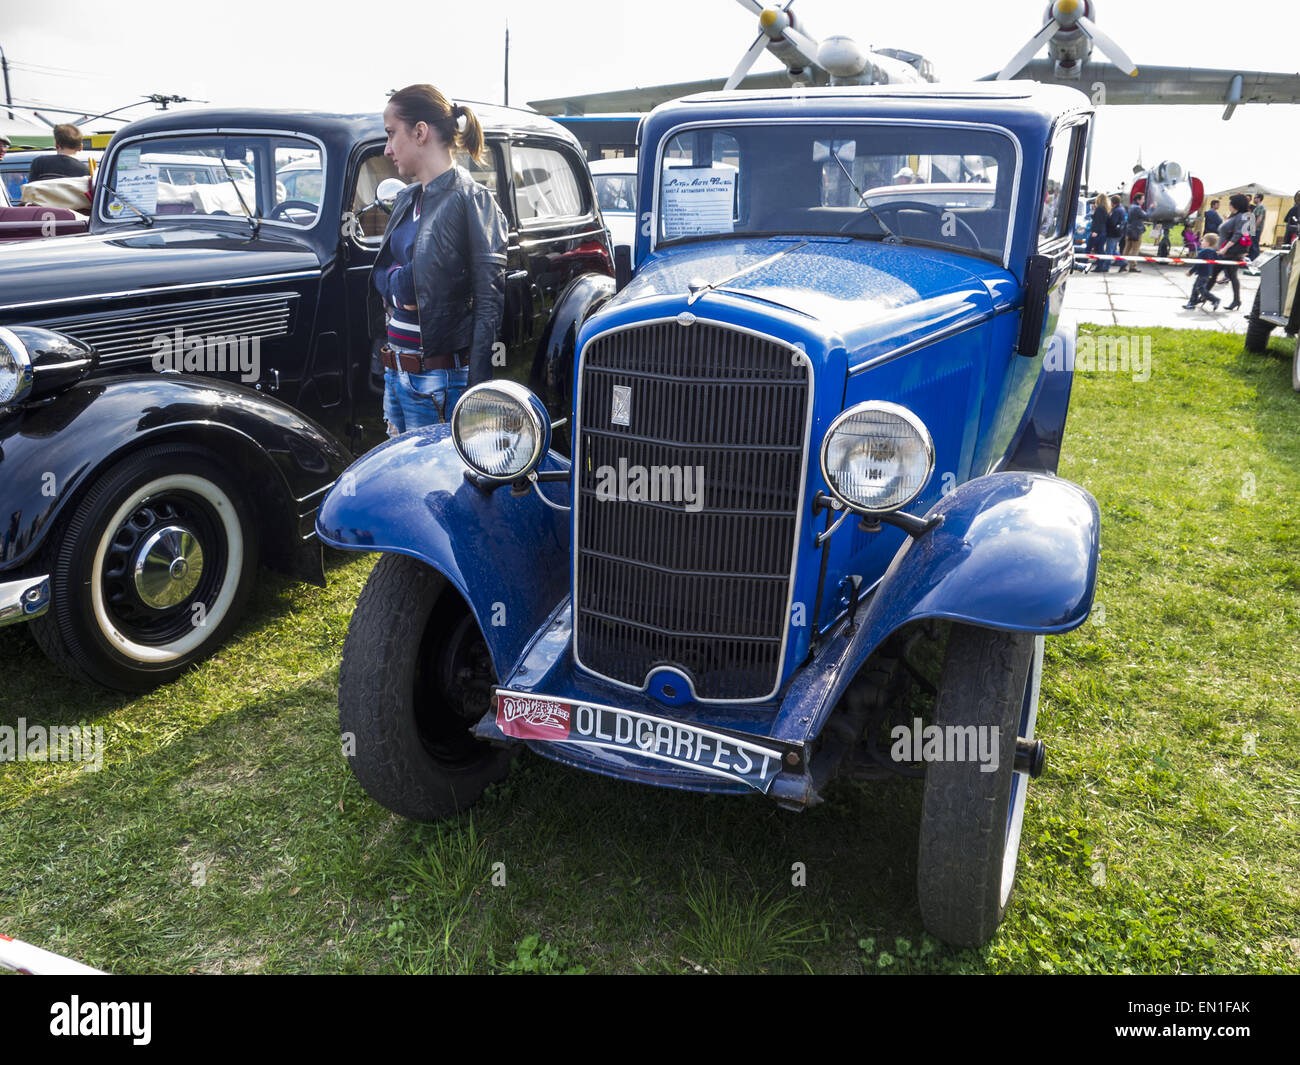 April 25, 2015 - Opel, 1937 -- The Retro OldCarFest is the biggest retro cars festival held in Kiev, and covers the State Aviation Museum grounds. More than 300 cars are involved into this project and more than 20 thousand visitors are expected to attend. © Igor Golovniov/ZUMA Wire/Alamy Live News Stock Photo